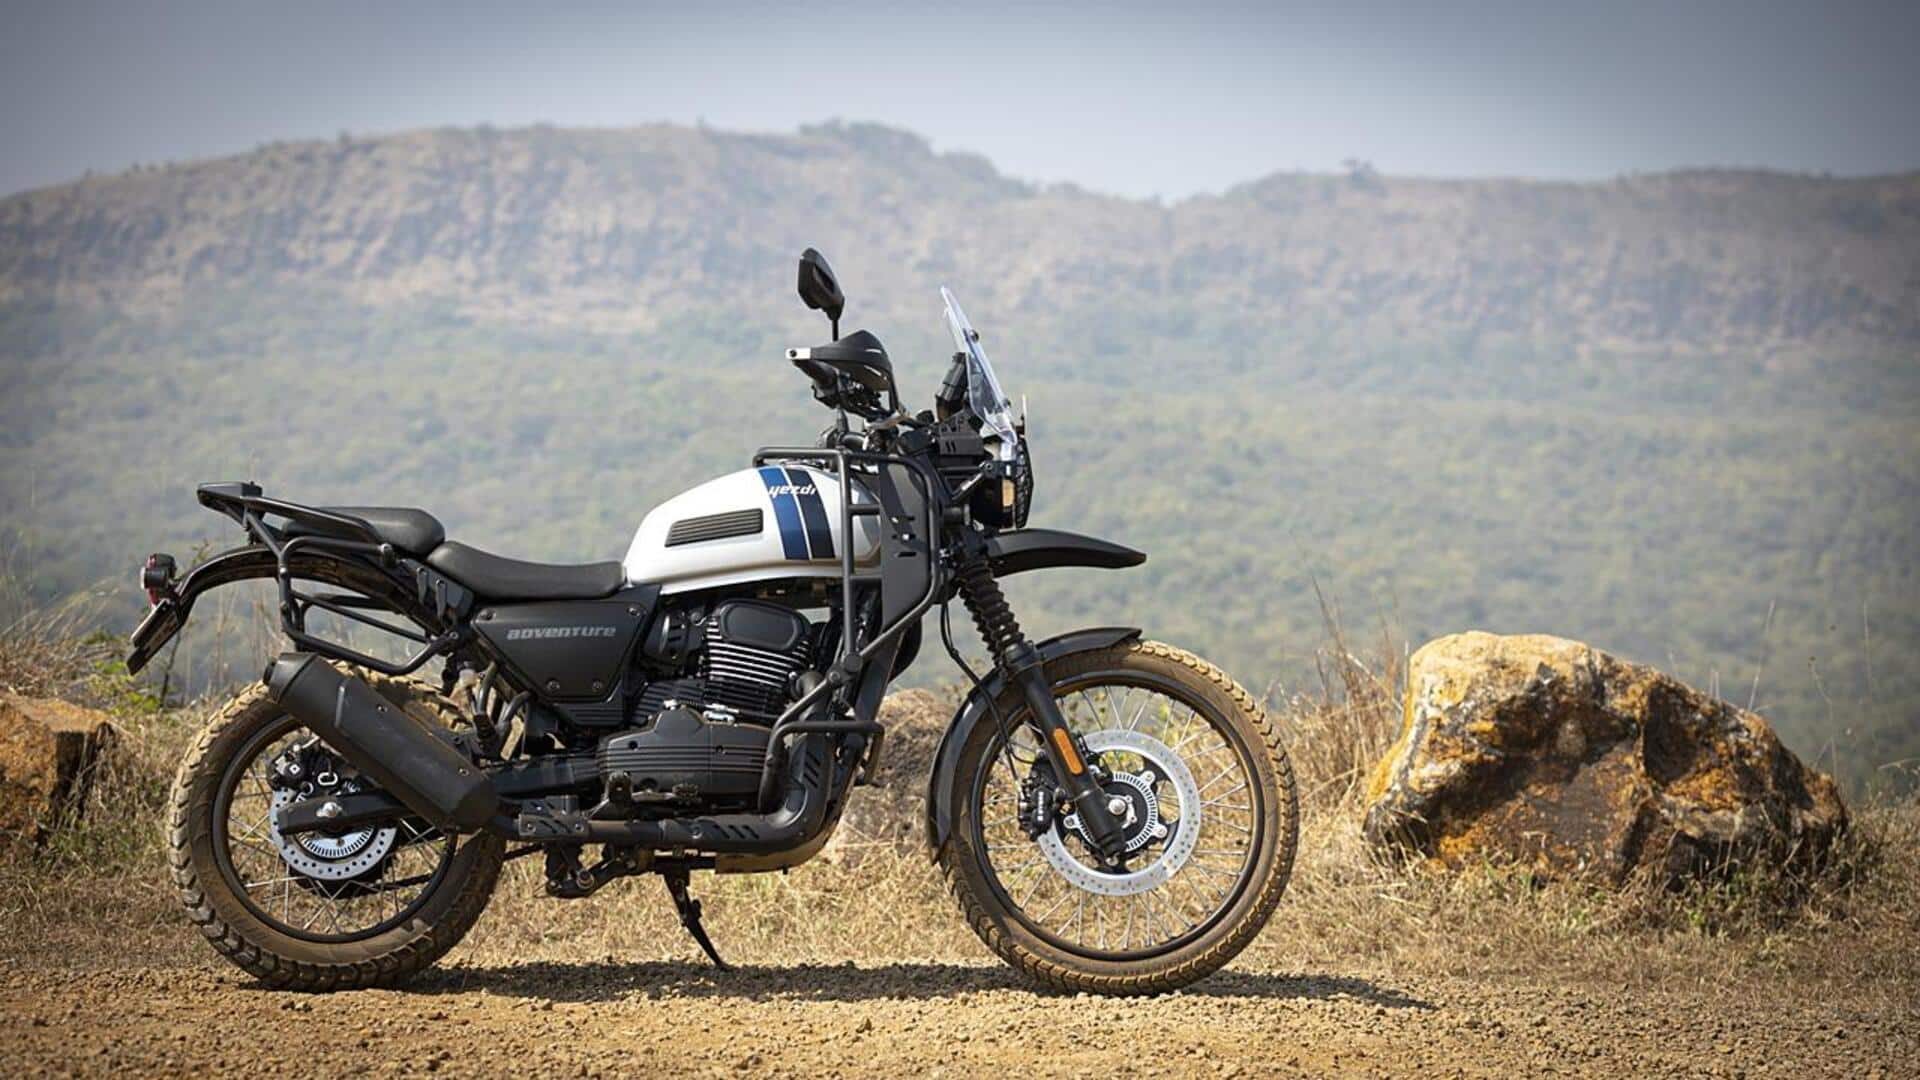 Yezdi Adventure 350 spied on test in India: Expected features